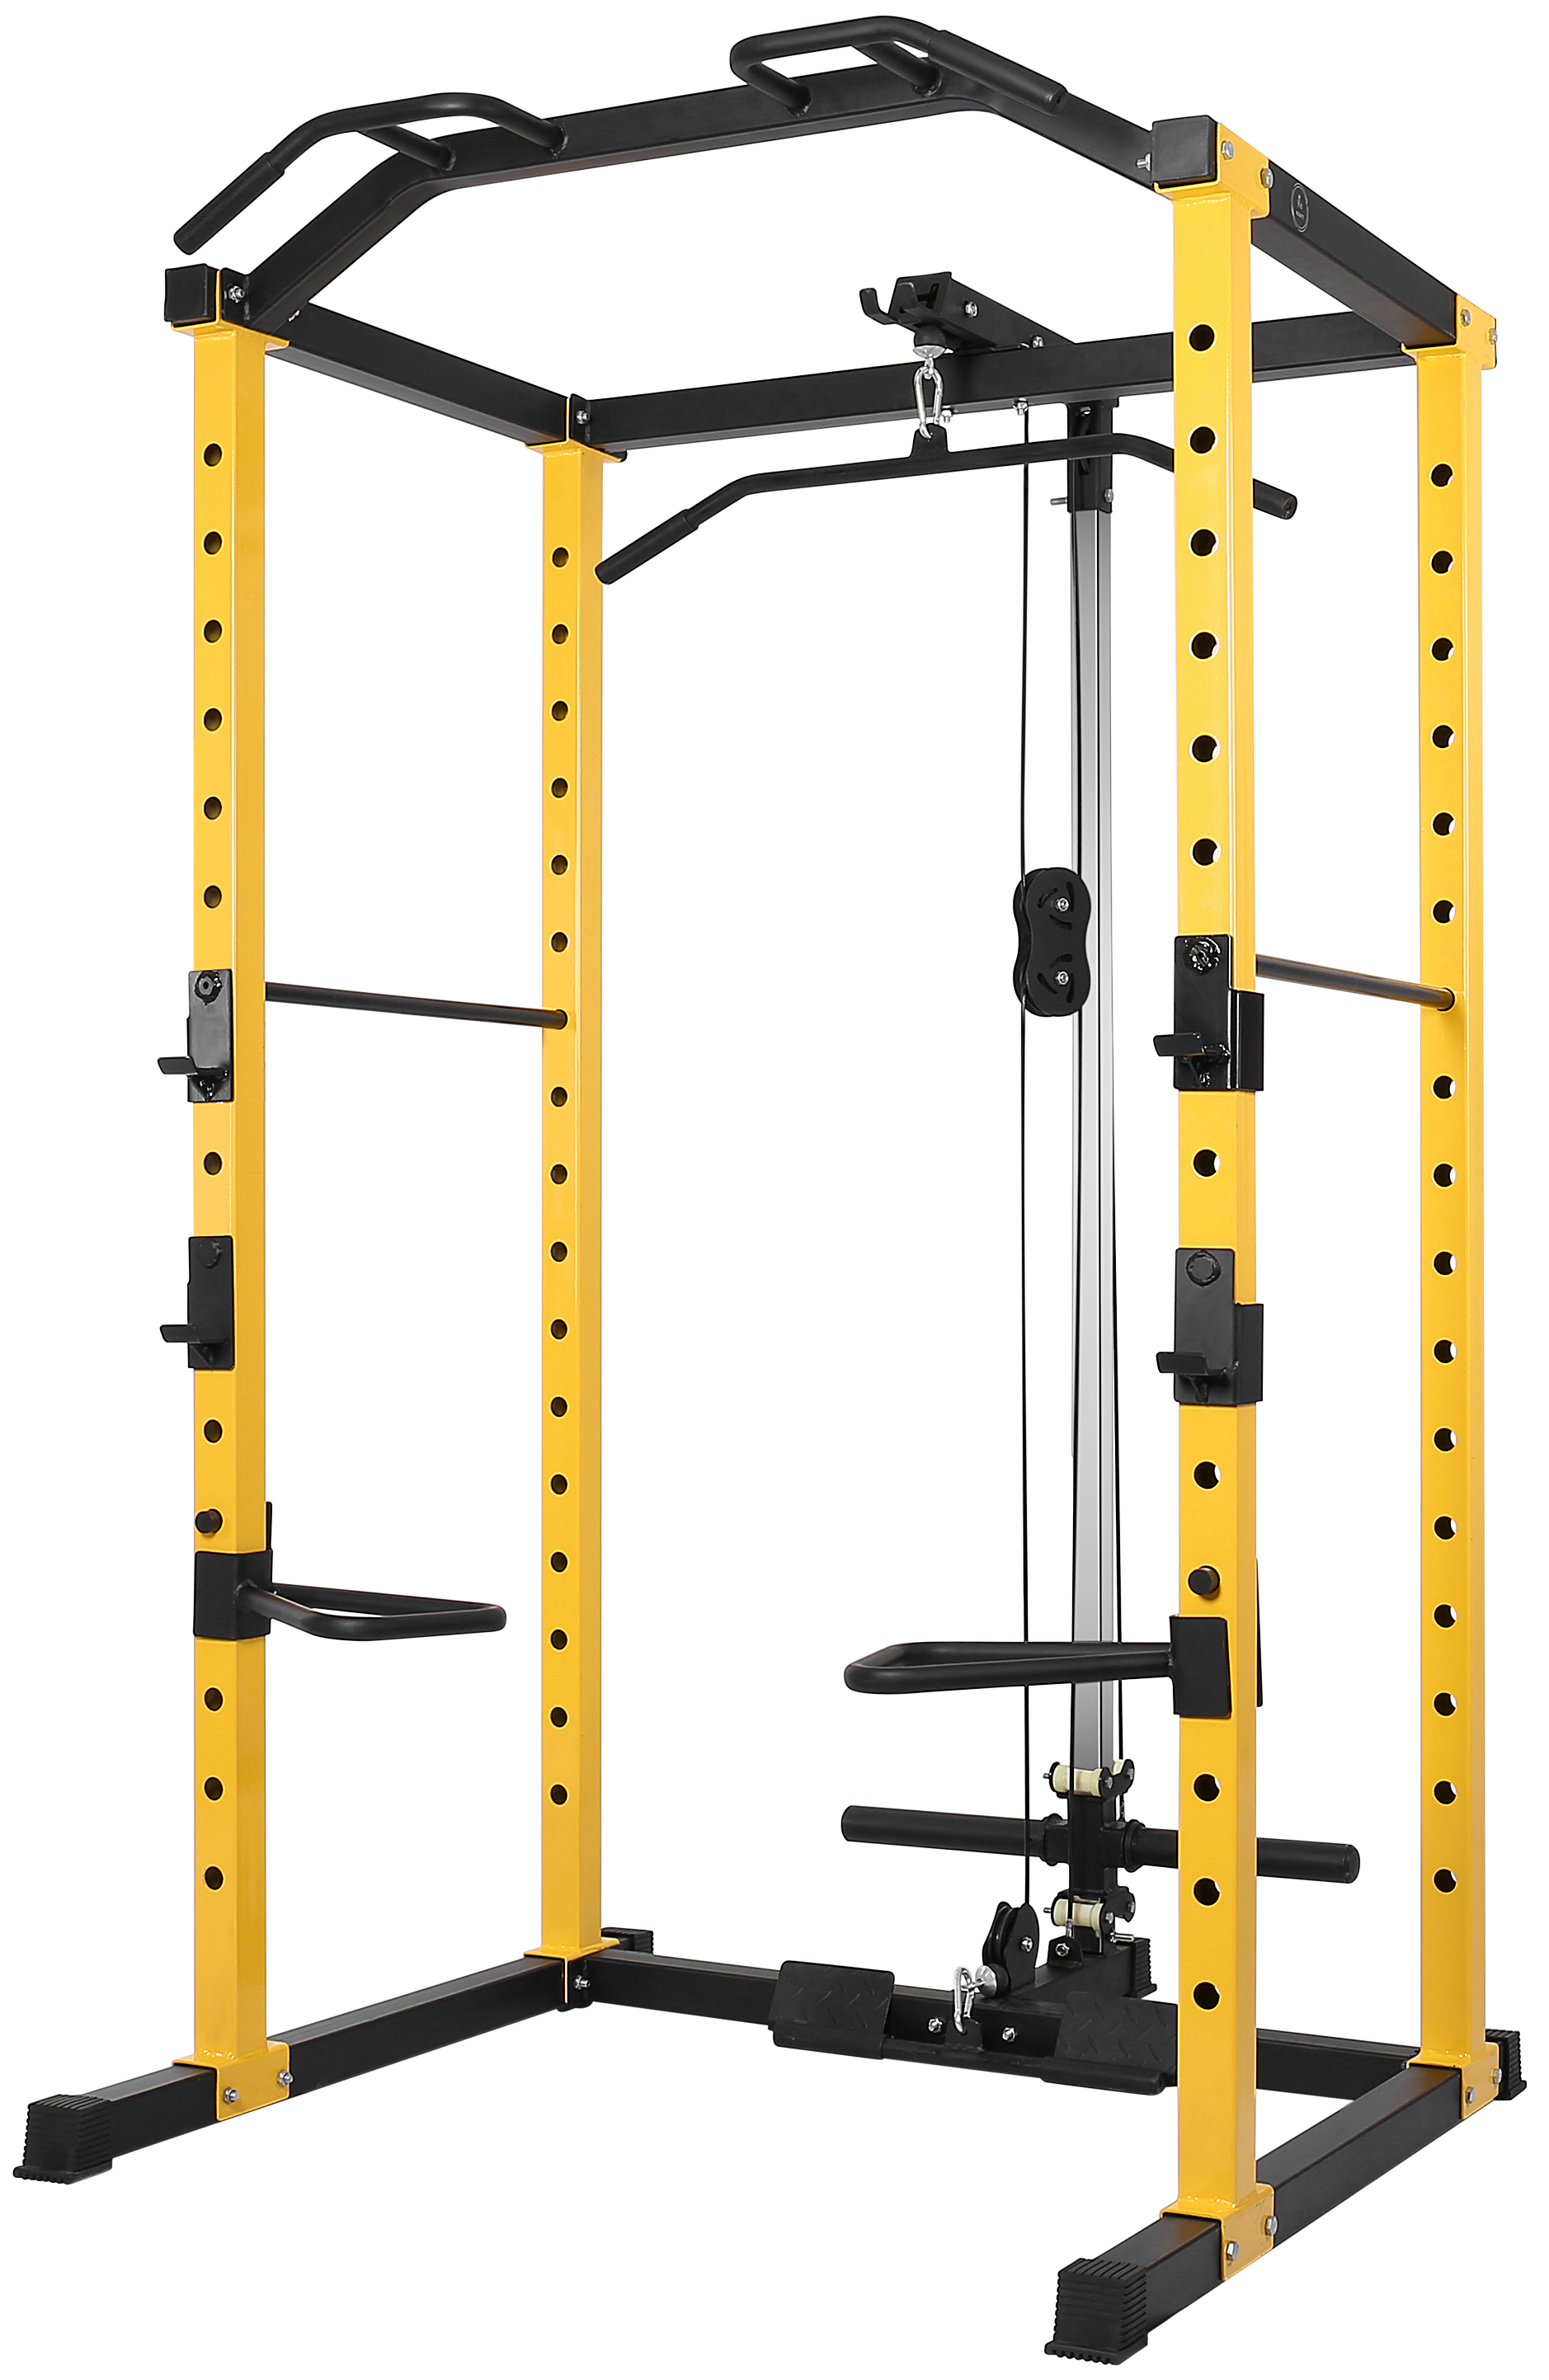 BalanceFrom PC-1 Series 1000lb Capacity Multi-Function Adjustable Power Cage Power Rack with Optional Lat Pull-down and Cable Crossover, Power Cage with Lat Pull-down - image 1 of 19